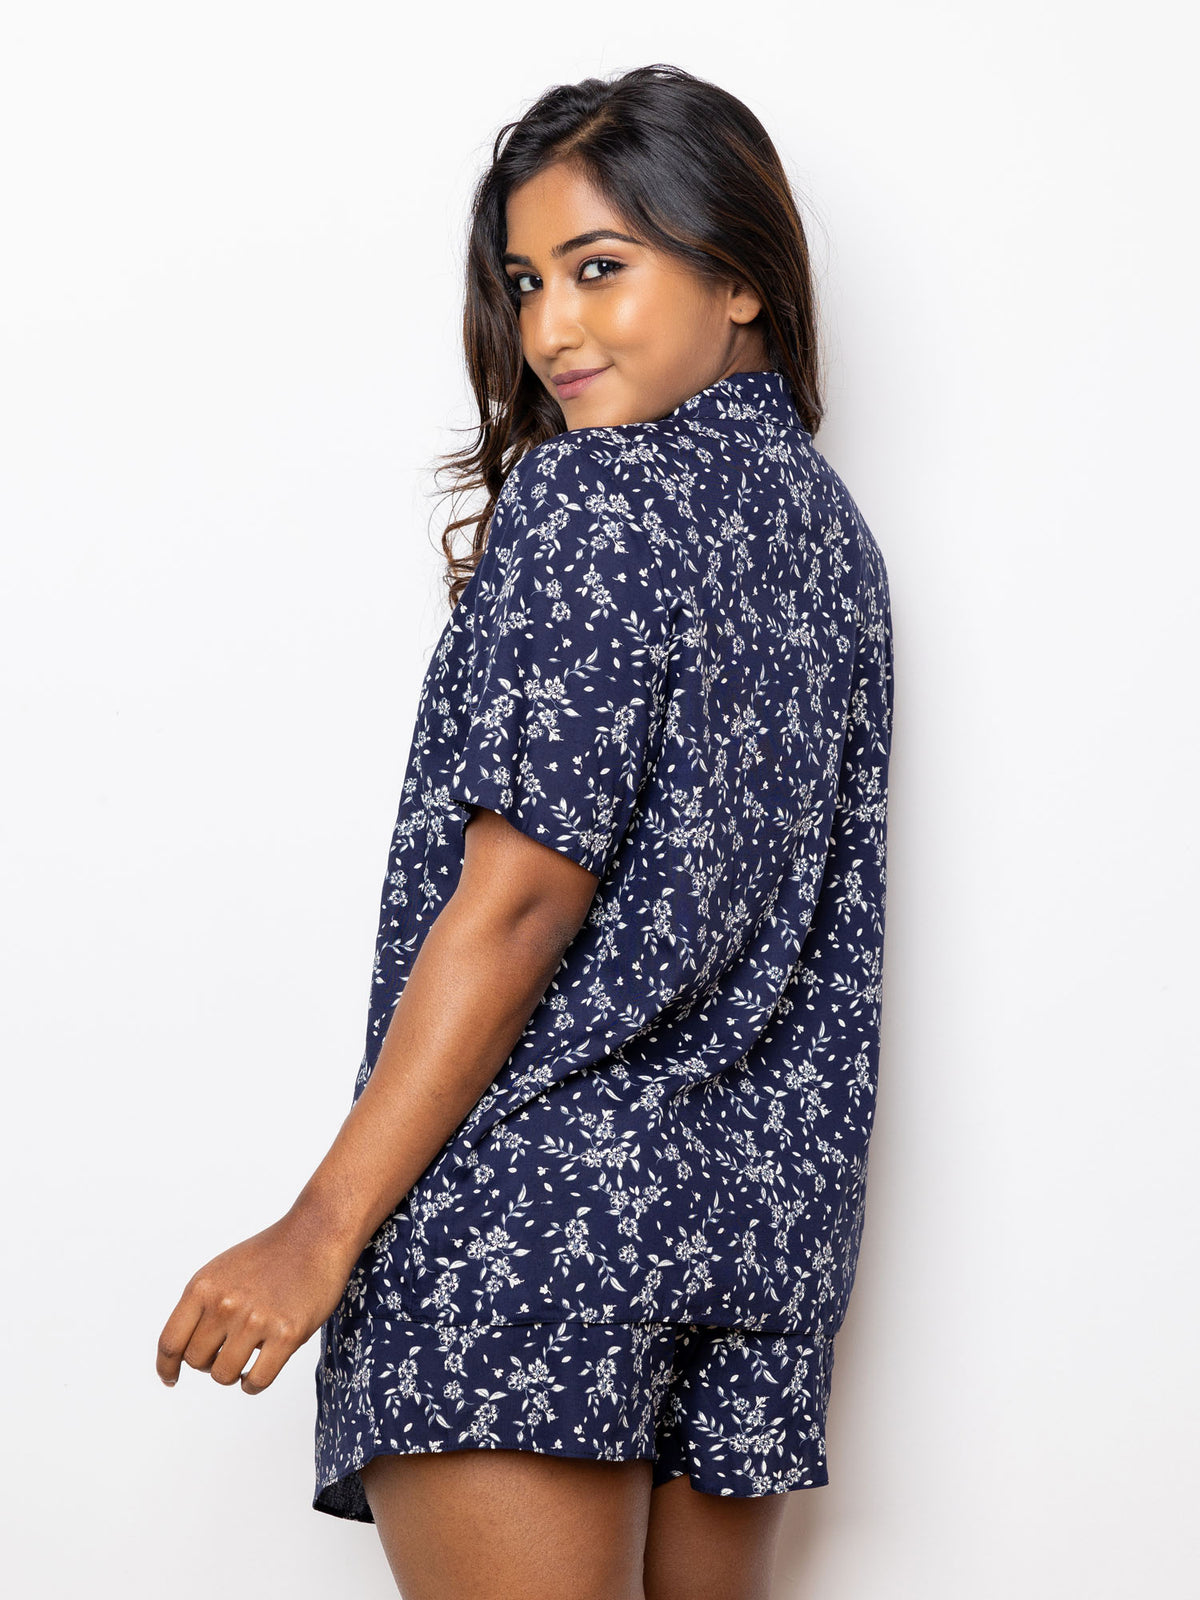 Valaria - Short Sleeve Classic SPJ Set in Ditsy Navy Floral